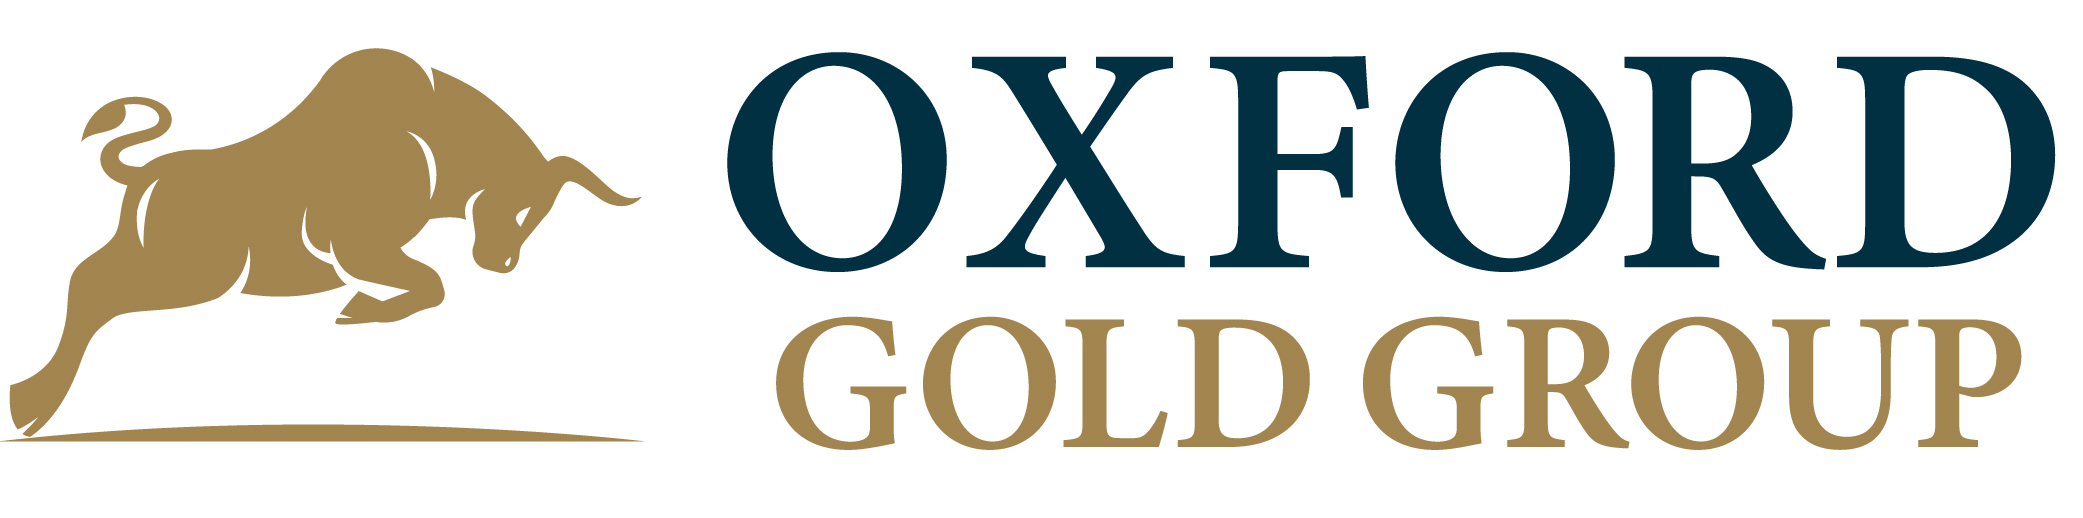 Oxford Gold Group 